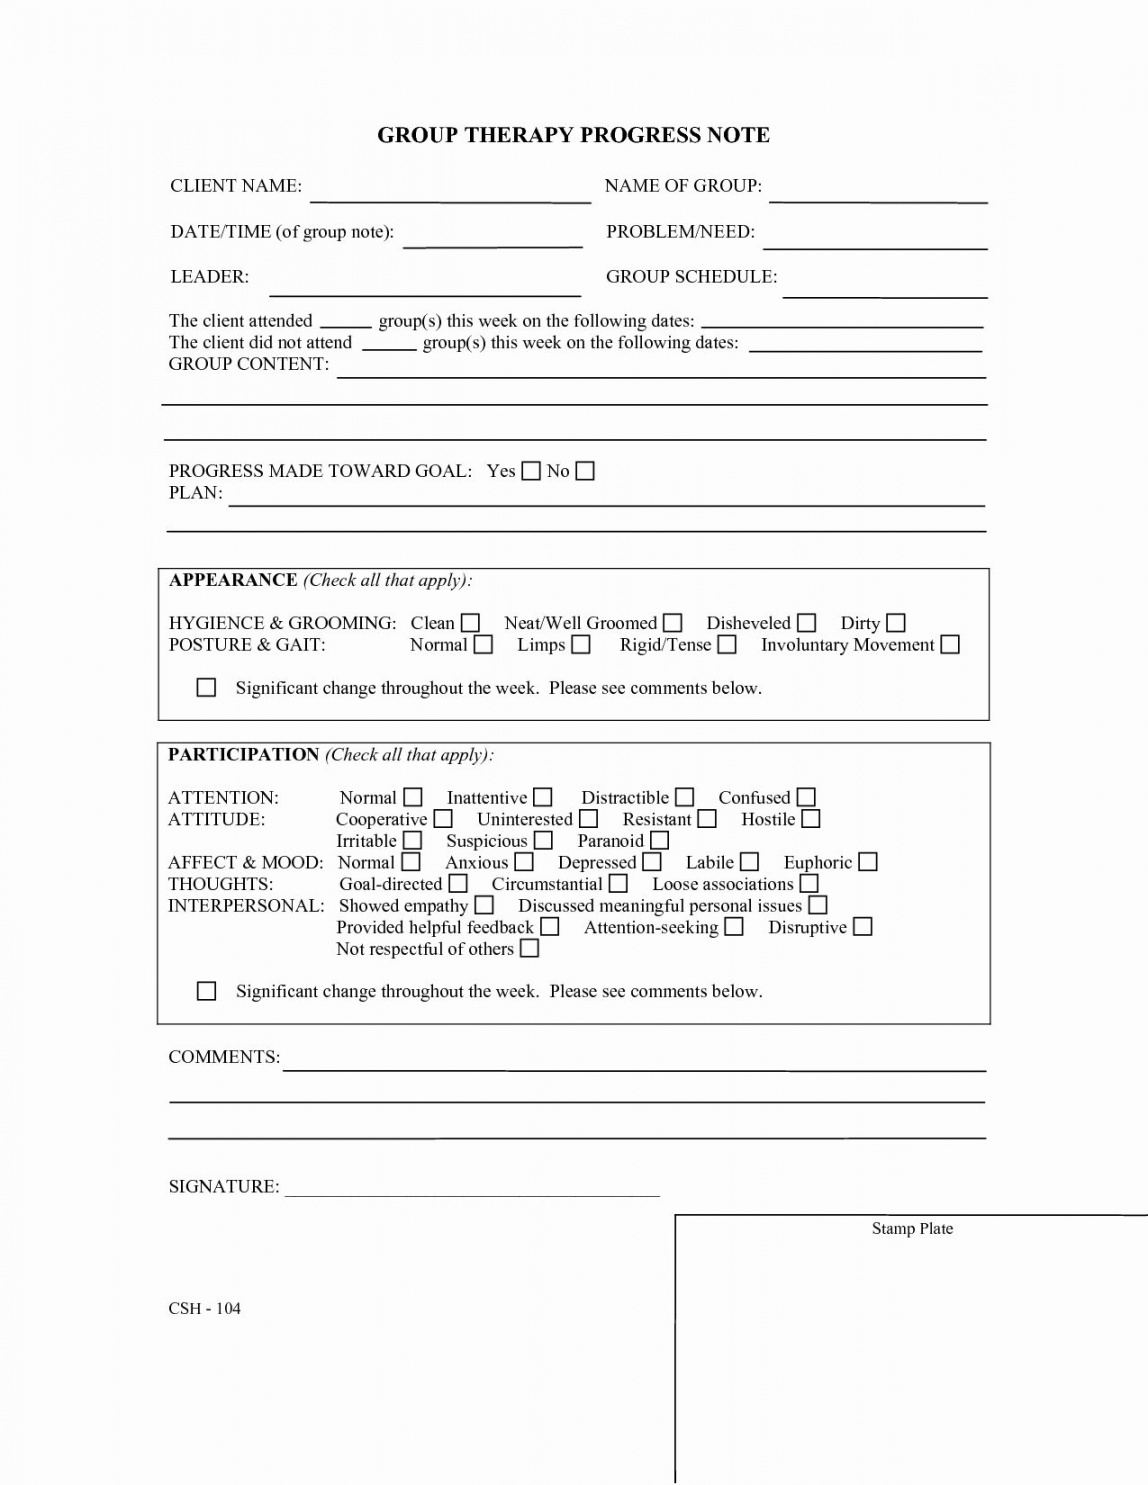 sample note format for cbt  soap note format template behavioral health mental health progress note template word